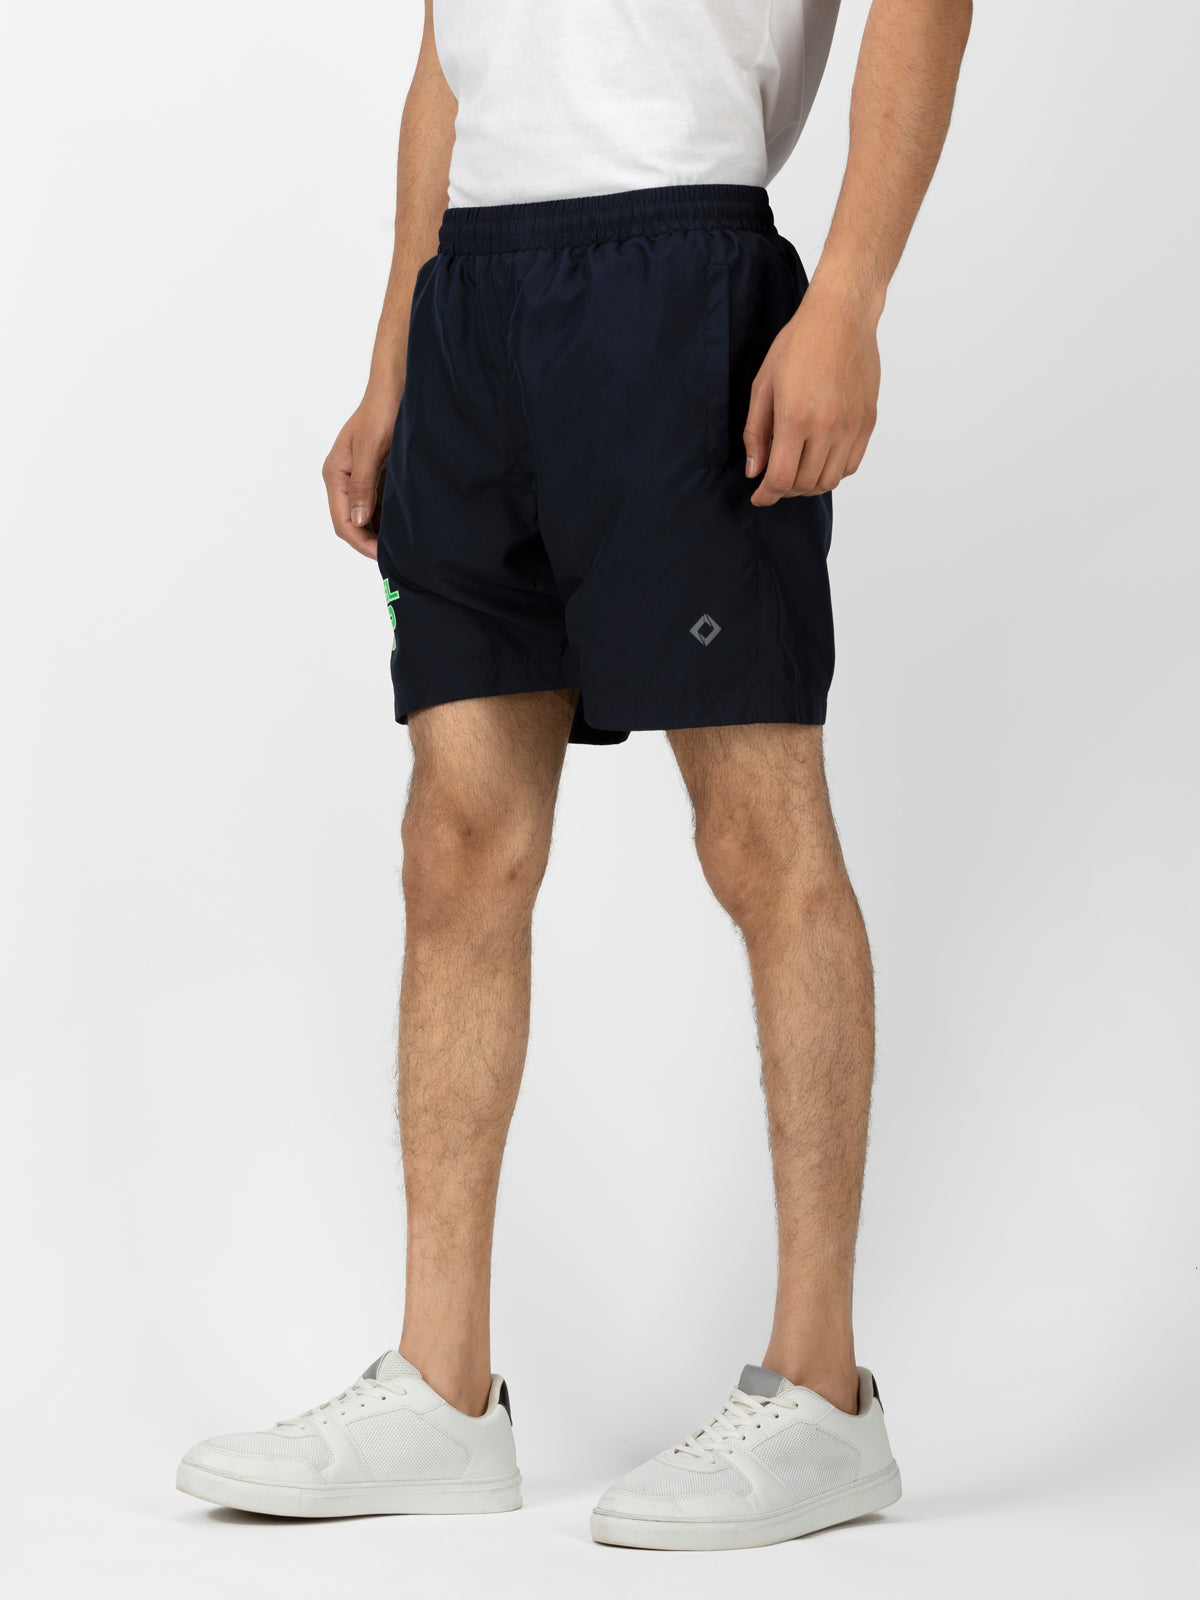 SOC Power Shorts Rapid Dry LevelUP